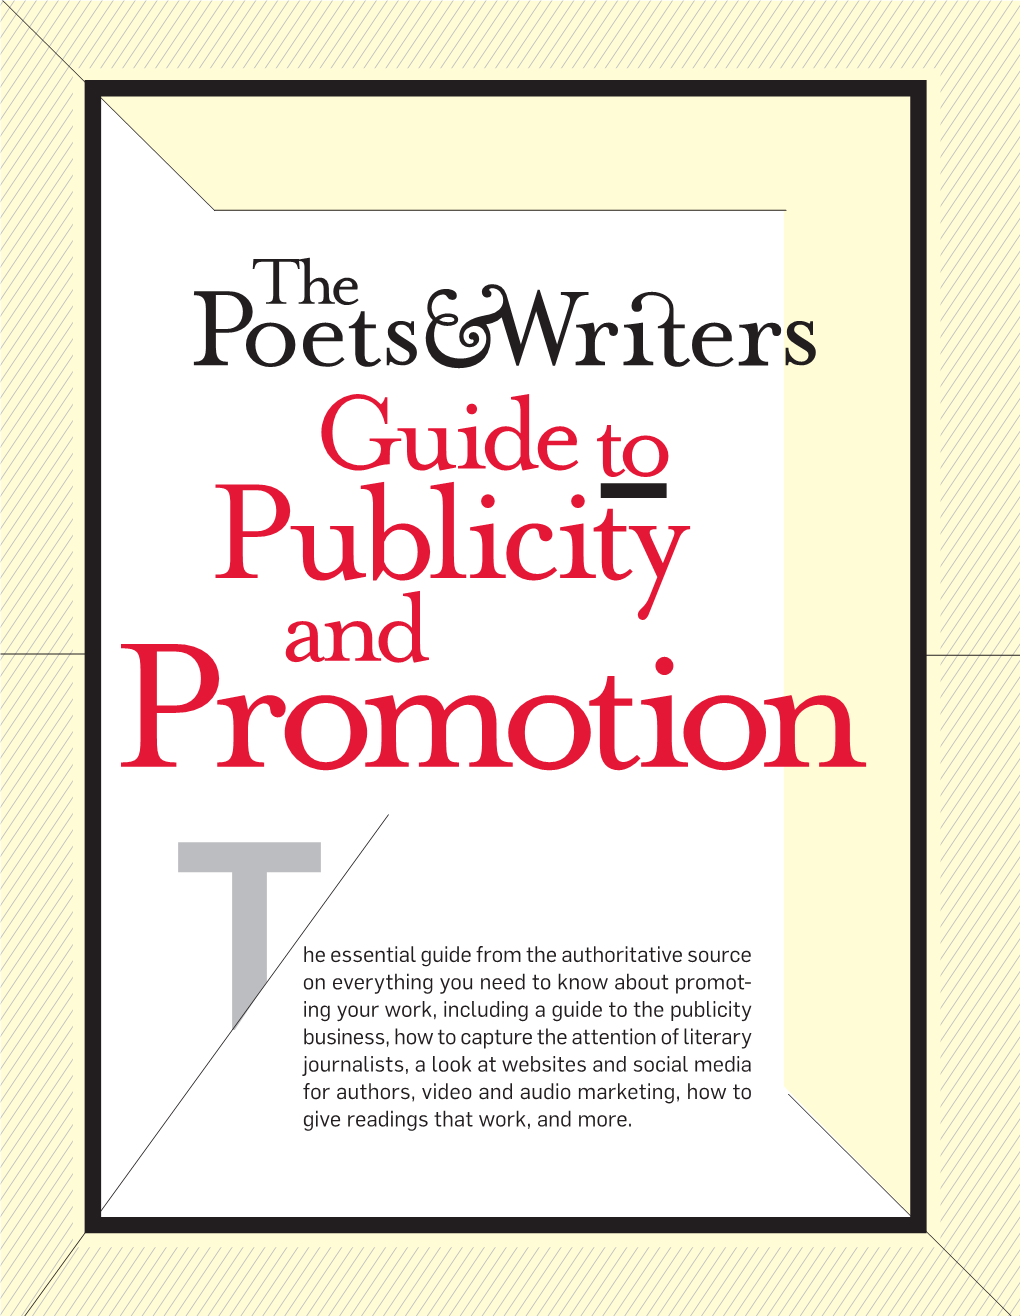 Guide to Publicity and Promotion, Which Includes Ten Articles Packed with Insider Tips and Informa- Tion to Help You Effectively Gain Attention for Tyour Work